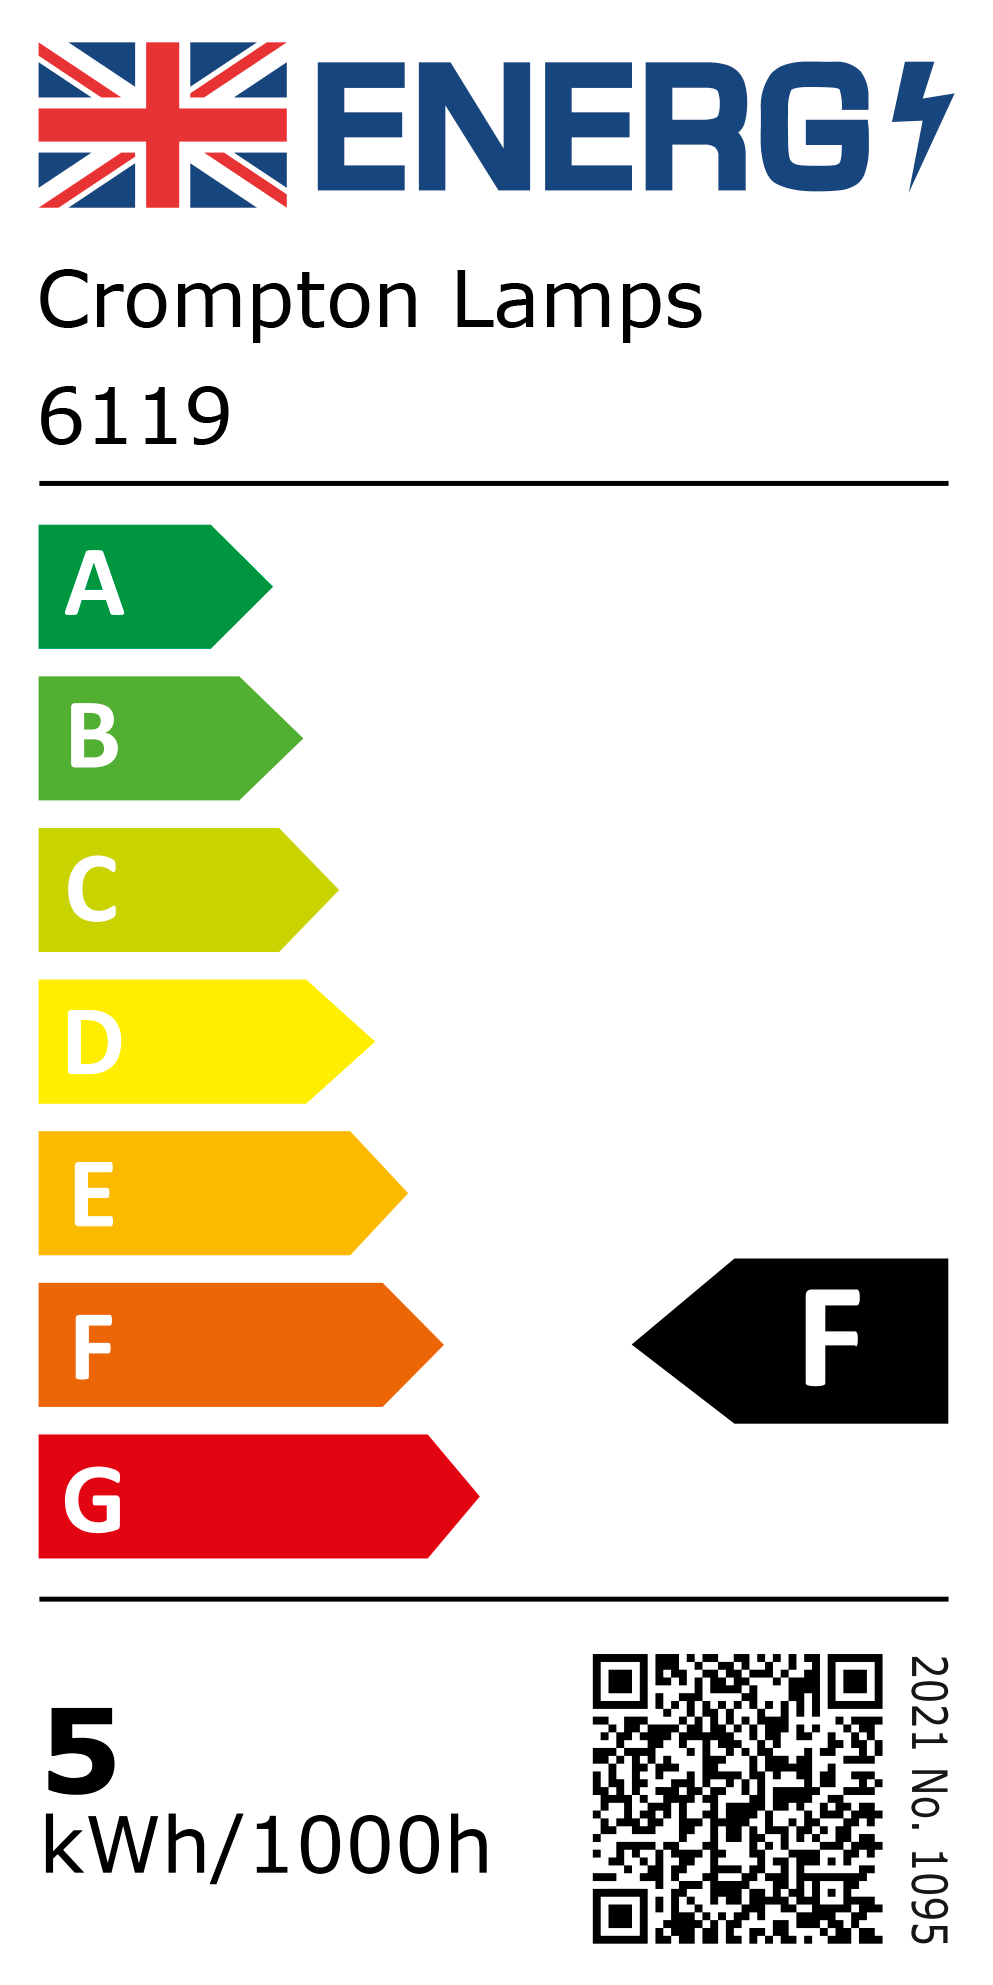 New 2021 Energy Rating Label: Stock Code 6119